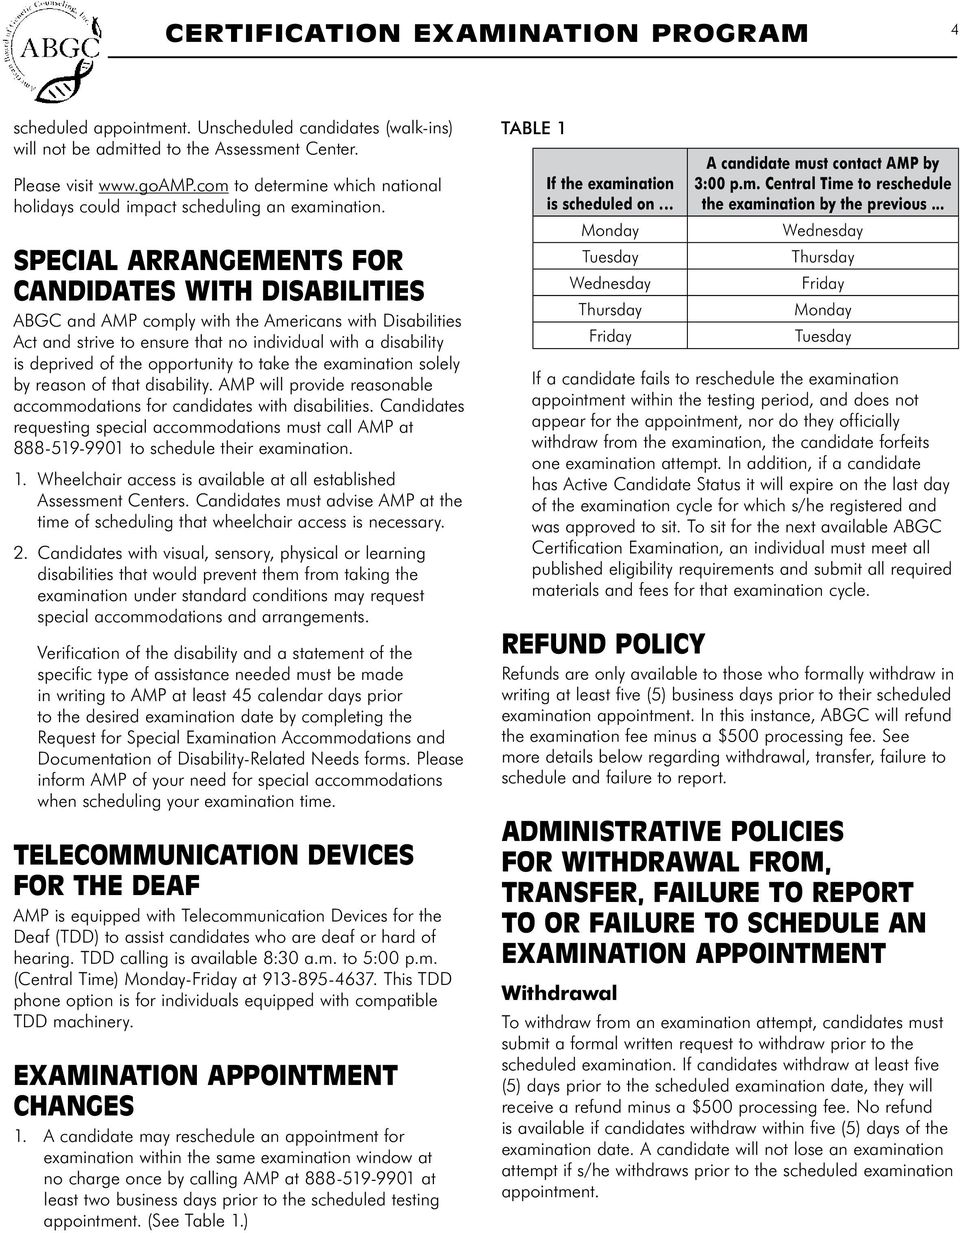 SPECIAL ARRANGEMENTS FOR CANDIDATES WITH DISABILITIES ABGC and AMP comply with the Americans with Disabilities Act and strive to ensure that no individual with a disability is deprived of the